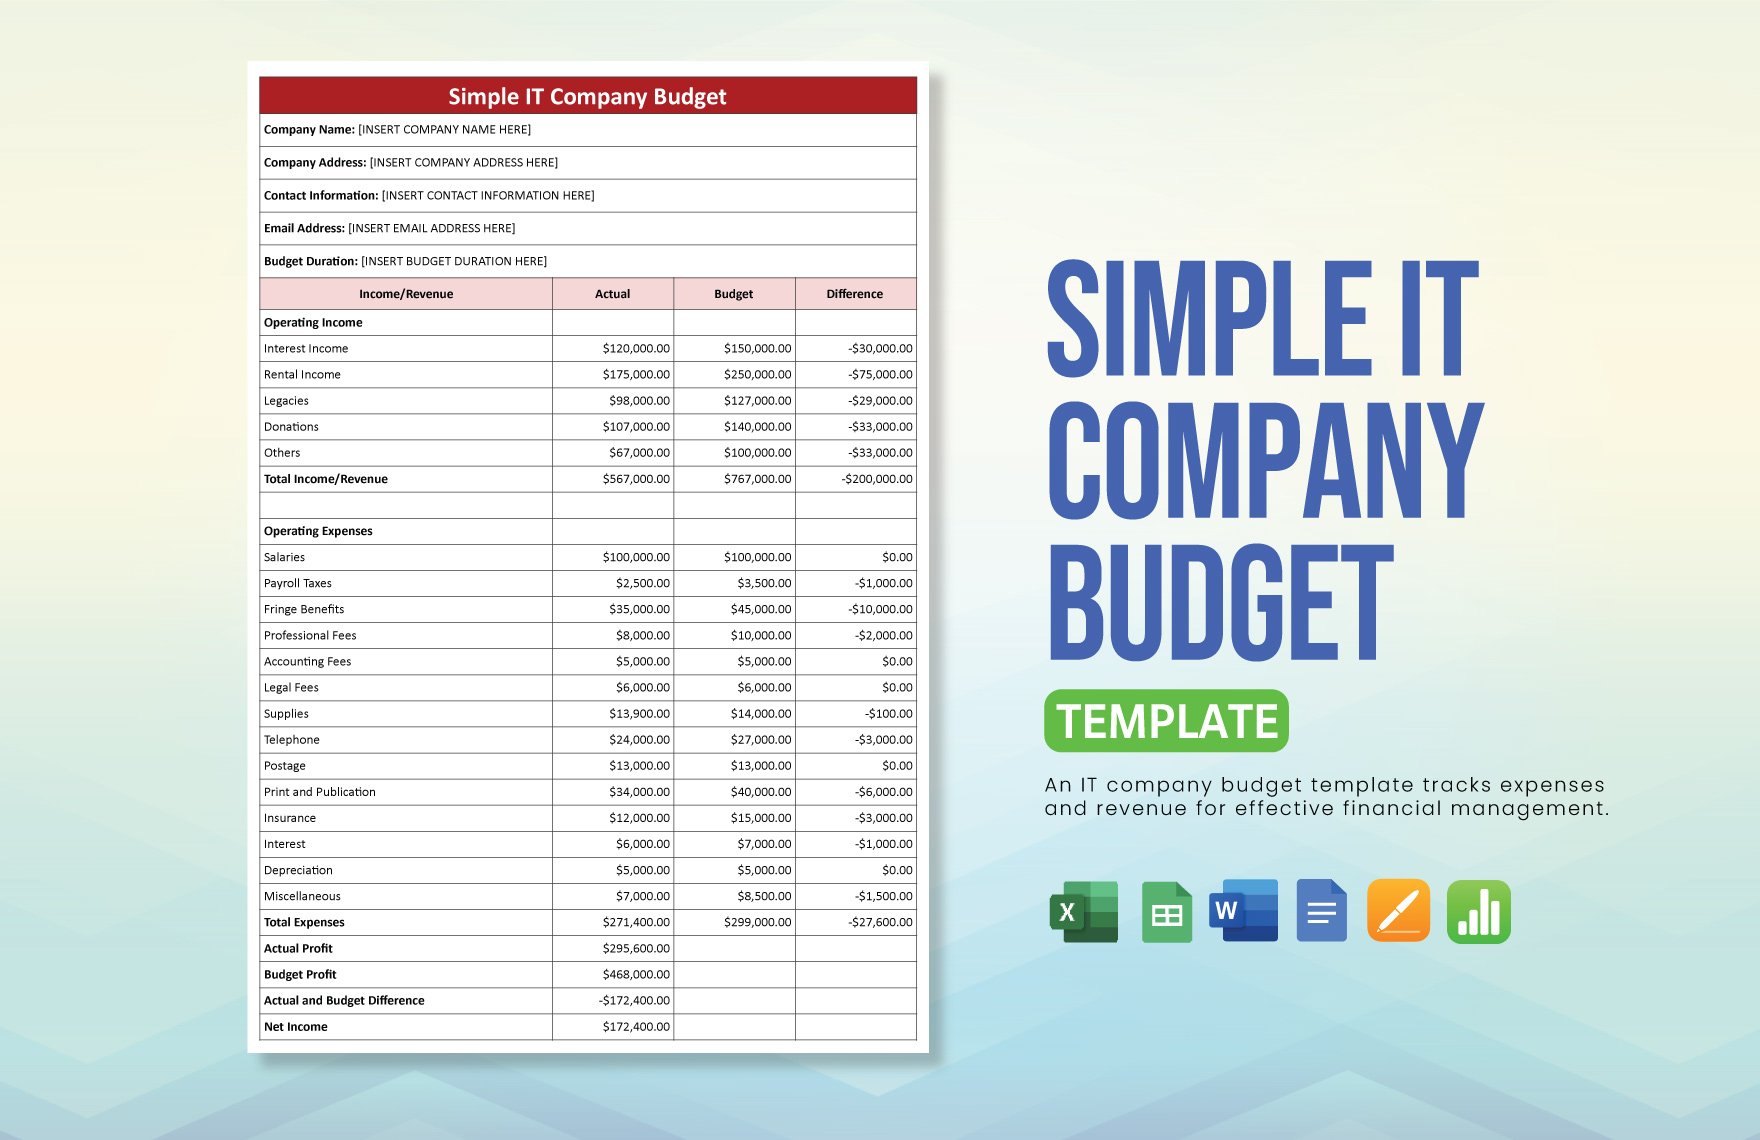 Simple IT Company Budget Template in Word, Google Docs, Excel, Google Sheets, Apple Pages, Apple Numbers